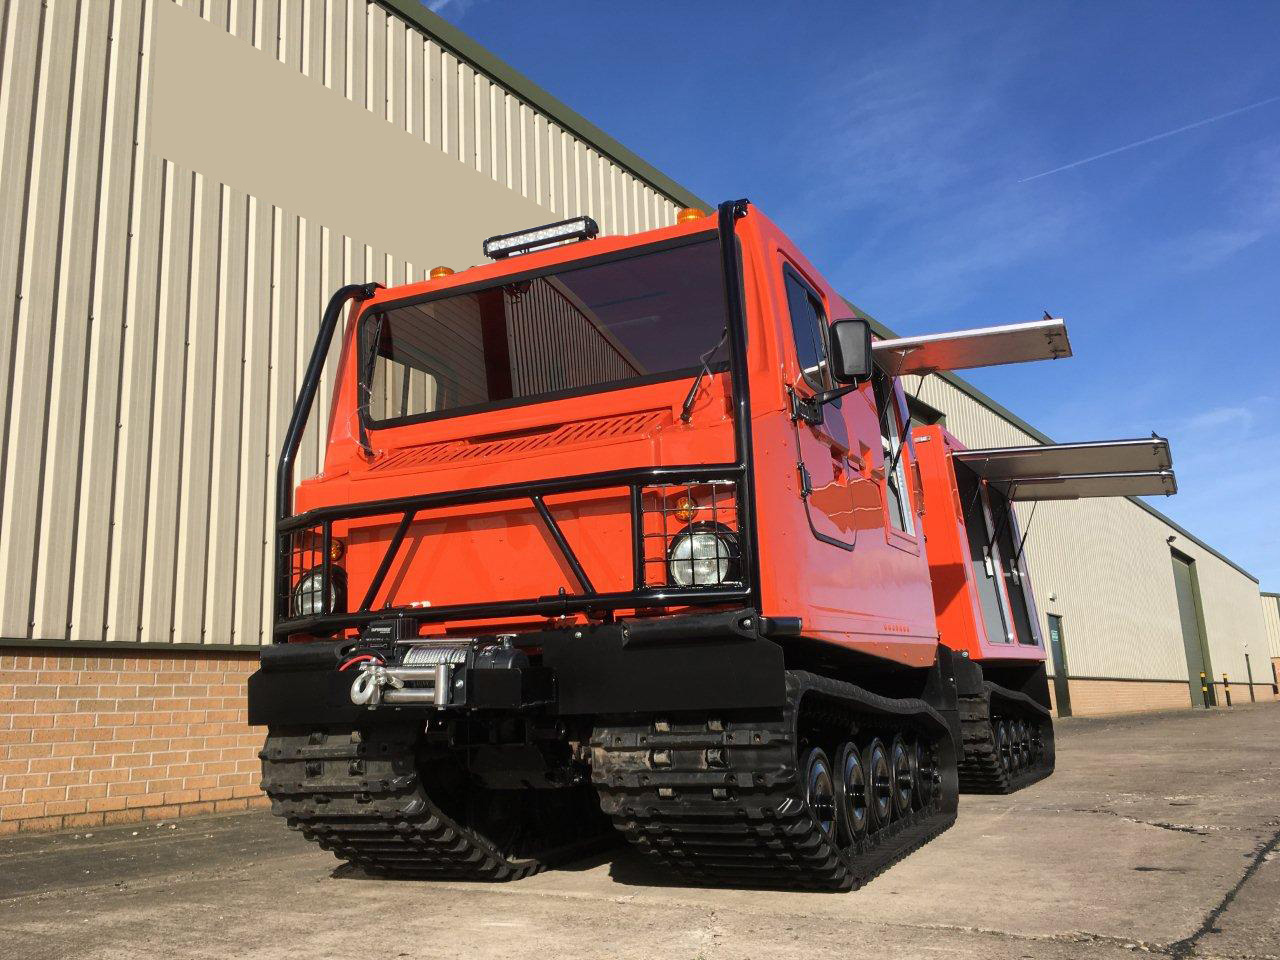 Hagglund BV206 Multi-Purpose Vehicle - 50253 - Govsales of mod surplus ex army trucks, ex army land rovers and other military vehicles for sale